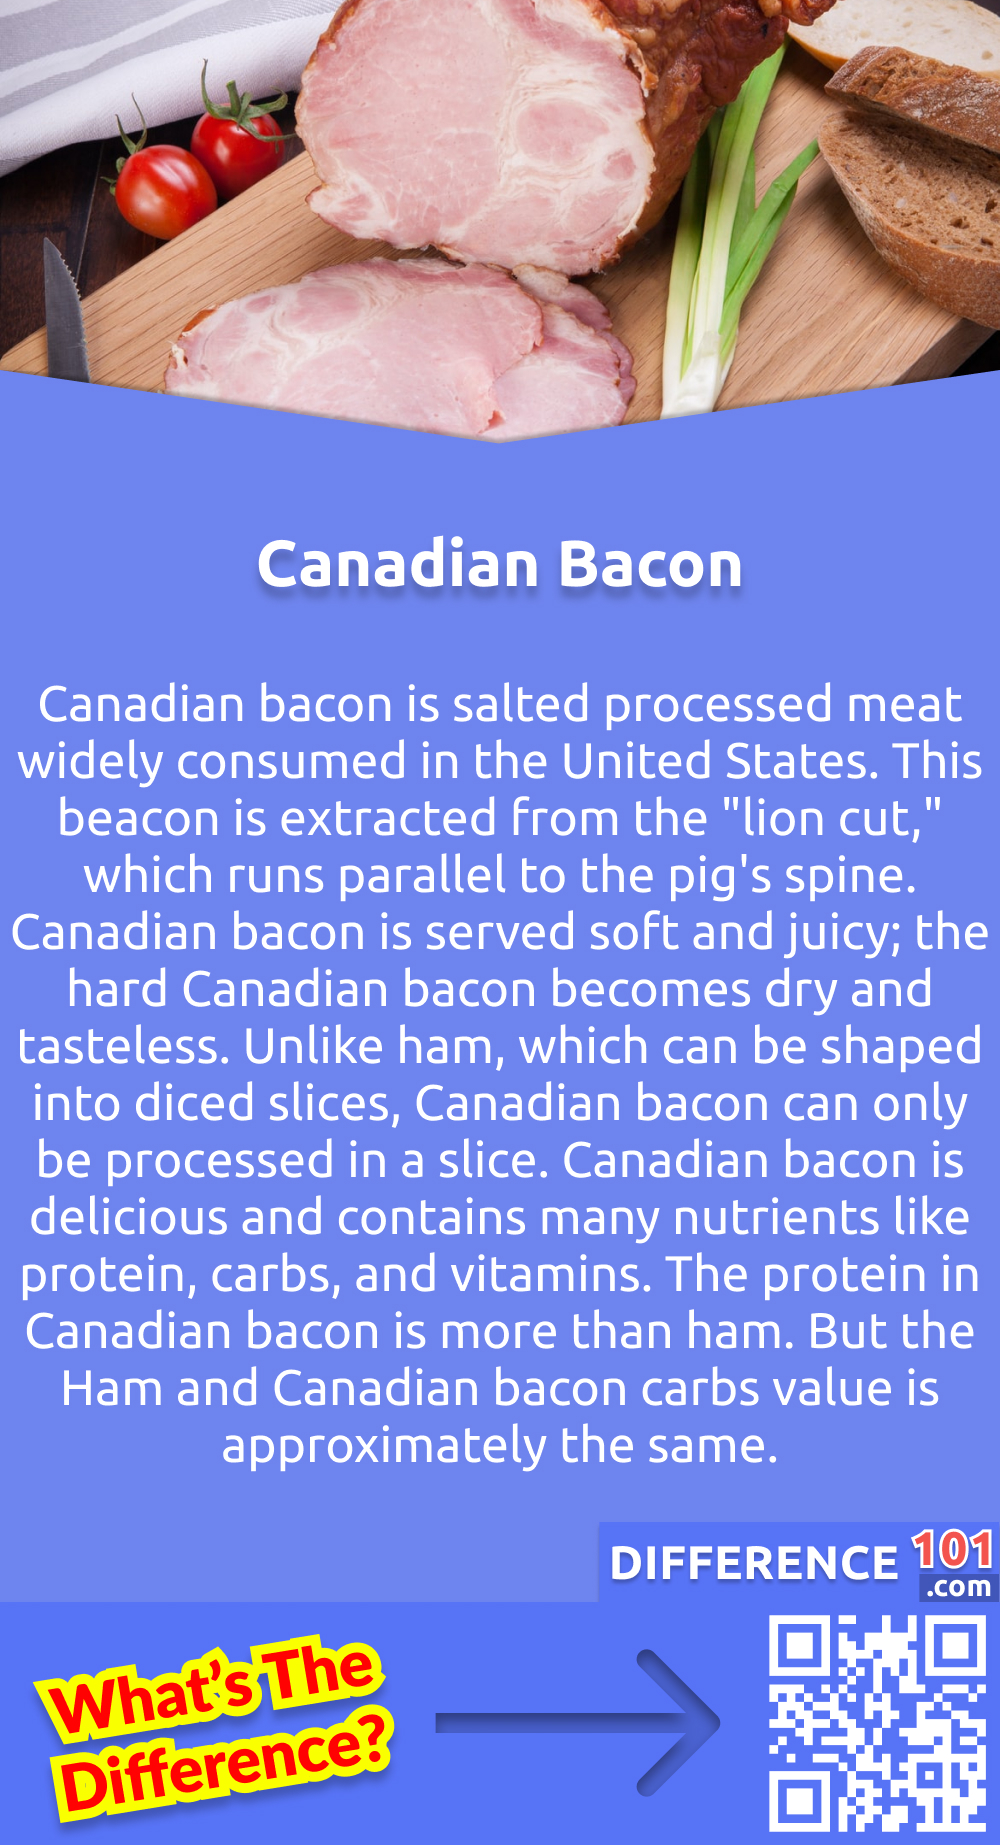 What is Canadian Bacon? Canadian bacon is salted processed meat widely consumed in the United States. This beacon is extracted from the "lion cut," which runs parallel to the pig's spine. Canadian bacon is served soft and juicy; the hard Canadian bacon becomes dry and tasteless. Unlike ham, which can be shaped into diced slices, Canadian bacon can only be processed in a slice. Canadian bacon is delicious and contains many nutrients like protein, carbs, and vitamins. The protein in Canadian bacon is more than ham. But the Ham and Canadian bacon carbs value is approximately the same.